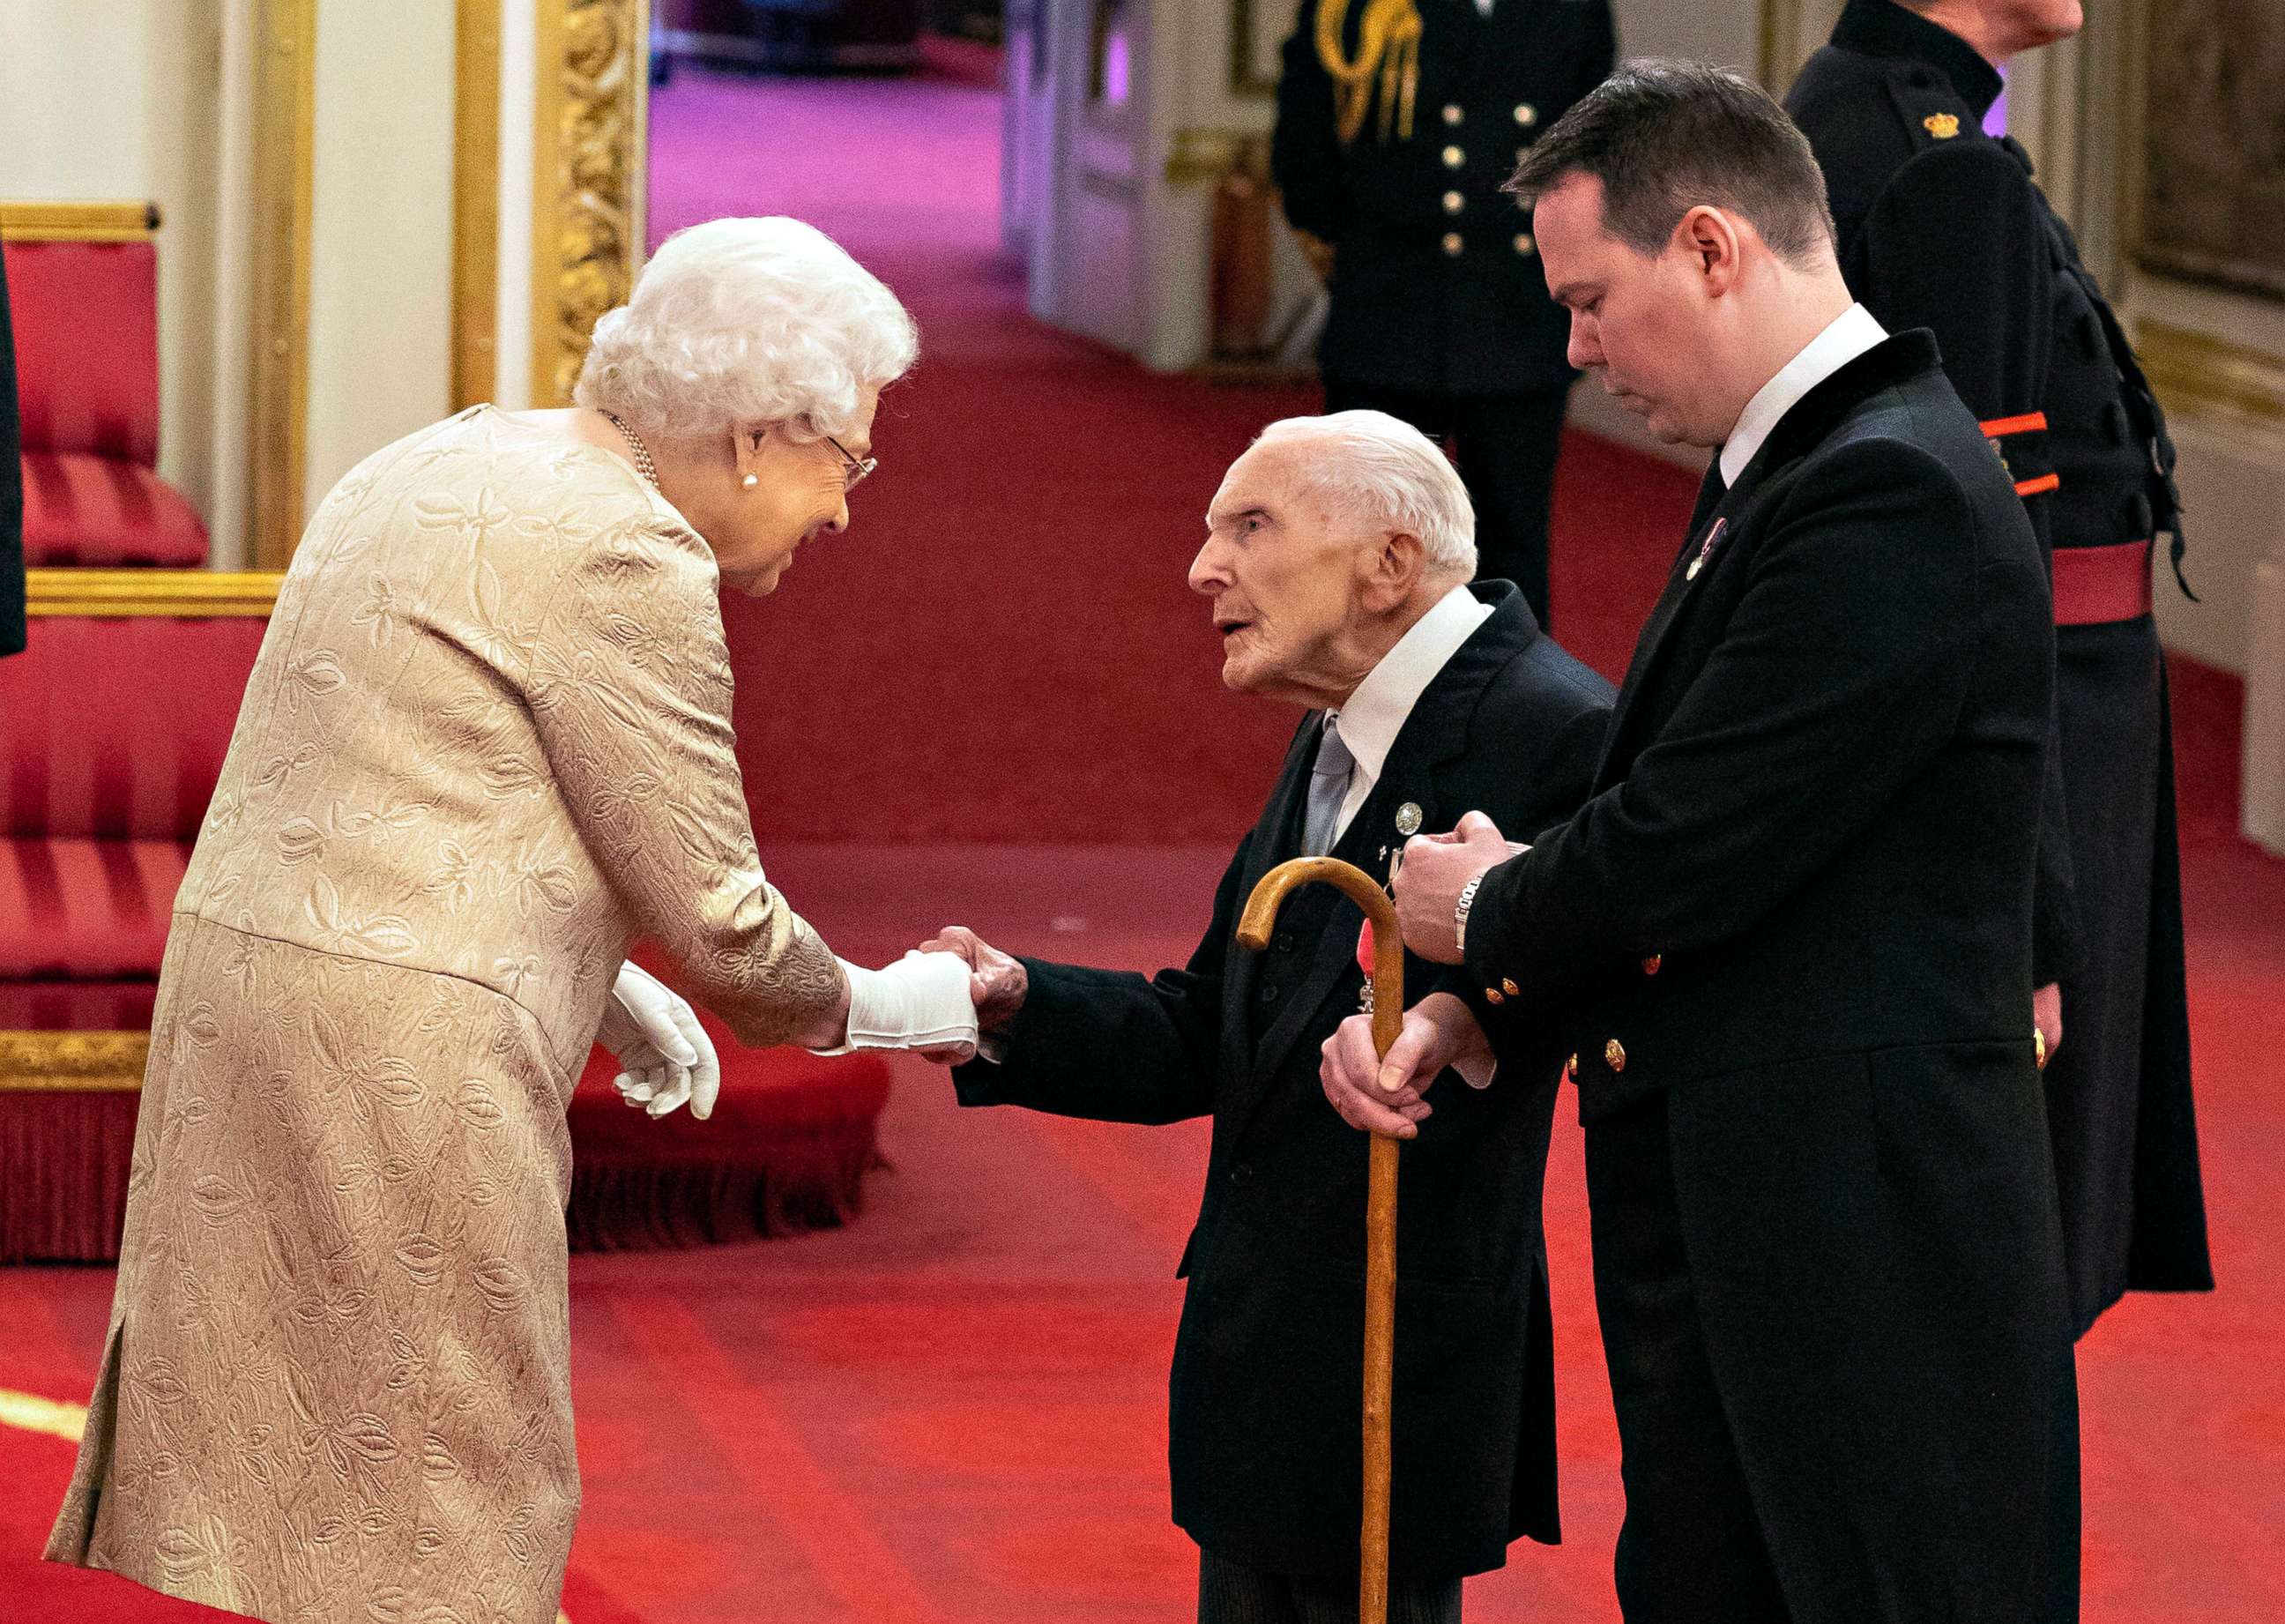 PHOTO: Queen Elizabeth wears gloves as she awards the MBE (Member of the Order of the British Empire) to Harry Billinge from St Austell, during an investiture ceremony at Buckingham Palace in London, March 3, 2020.